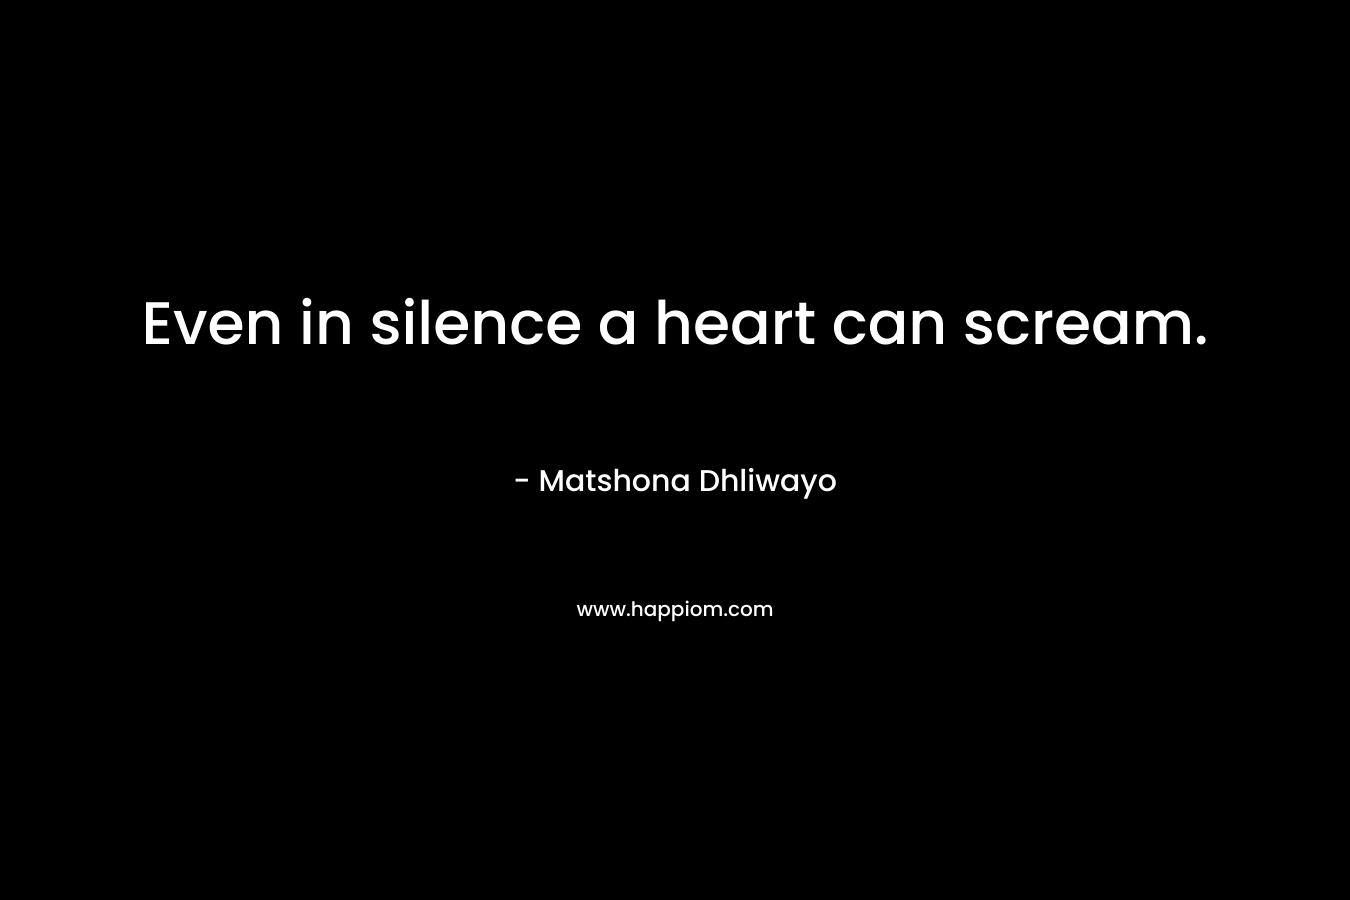 Even in silence a heart can scream.